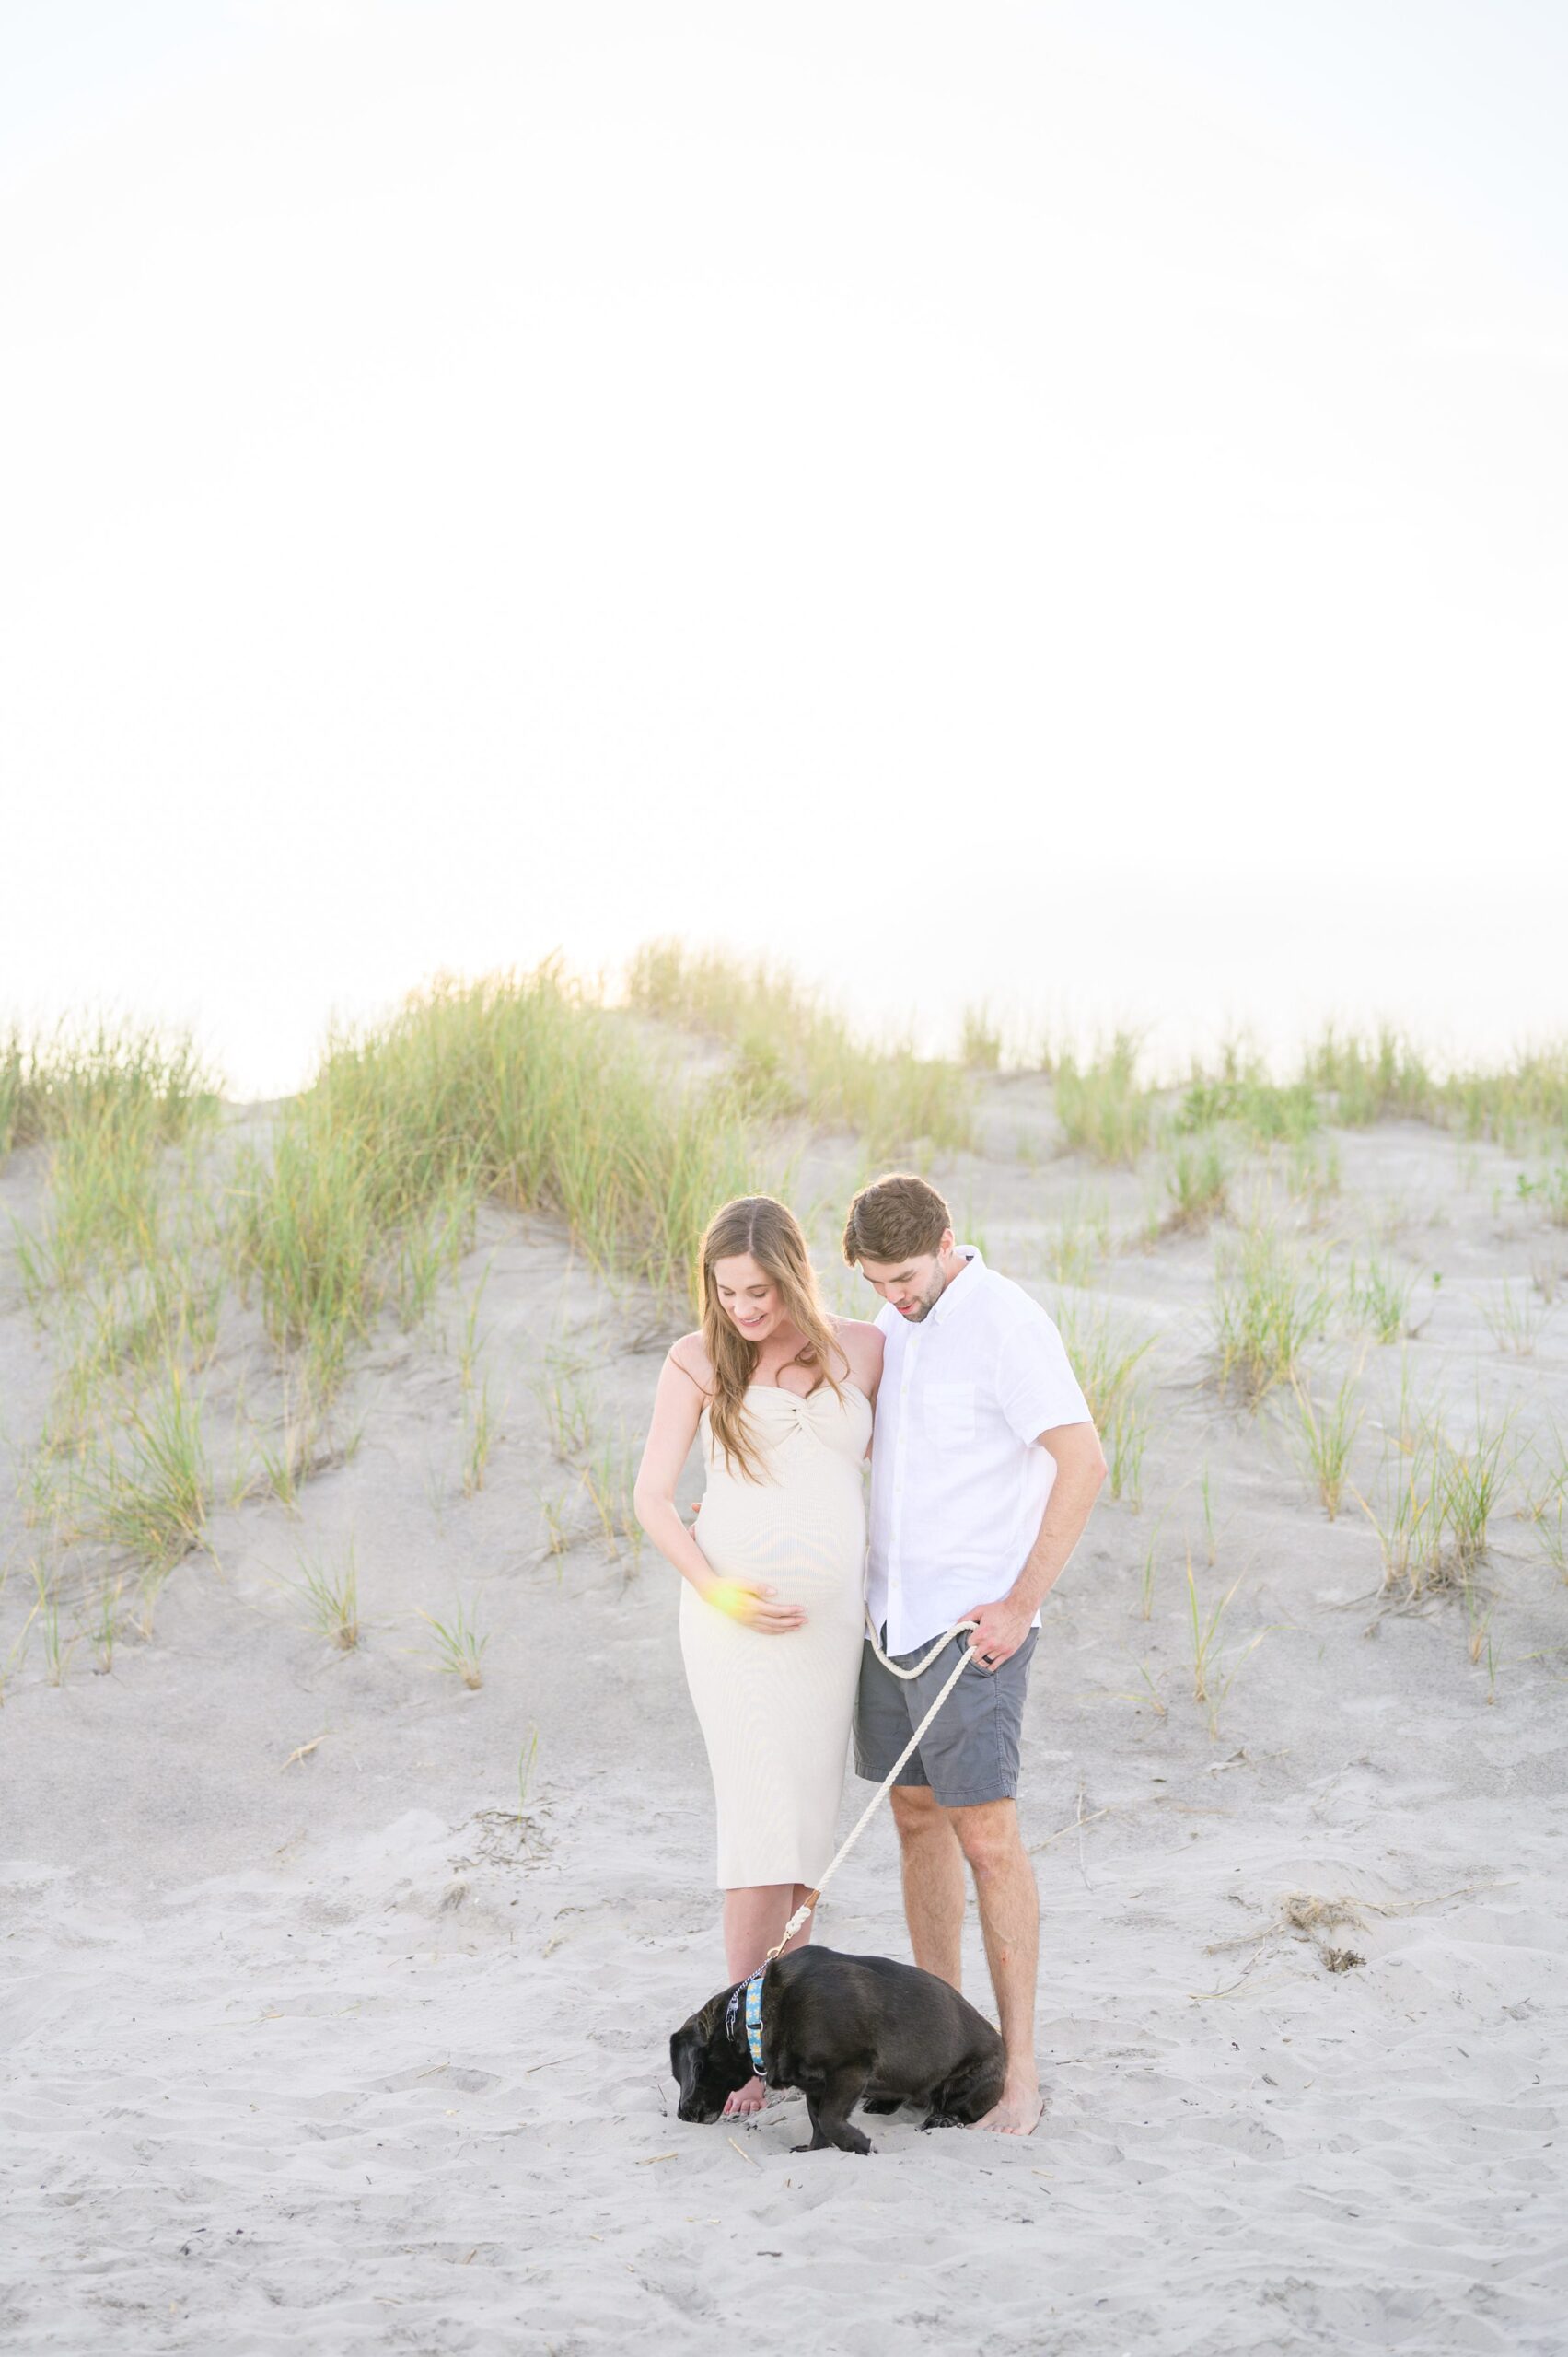 Stone Harbor Maternity Portraits in Cape May photographed by Baltimore Newborn and Family Photographer Cait Kramer Photography.